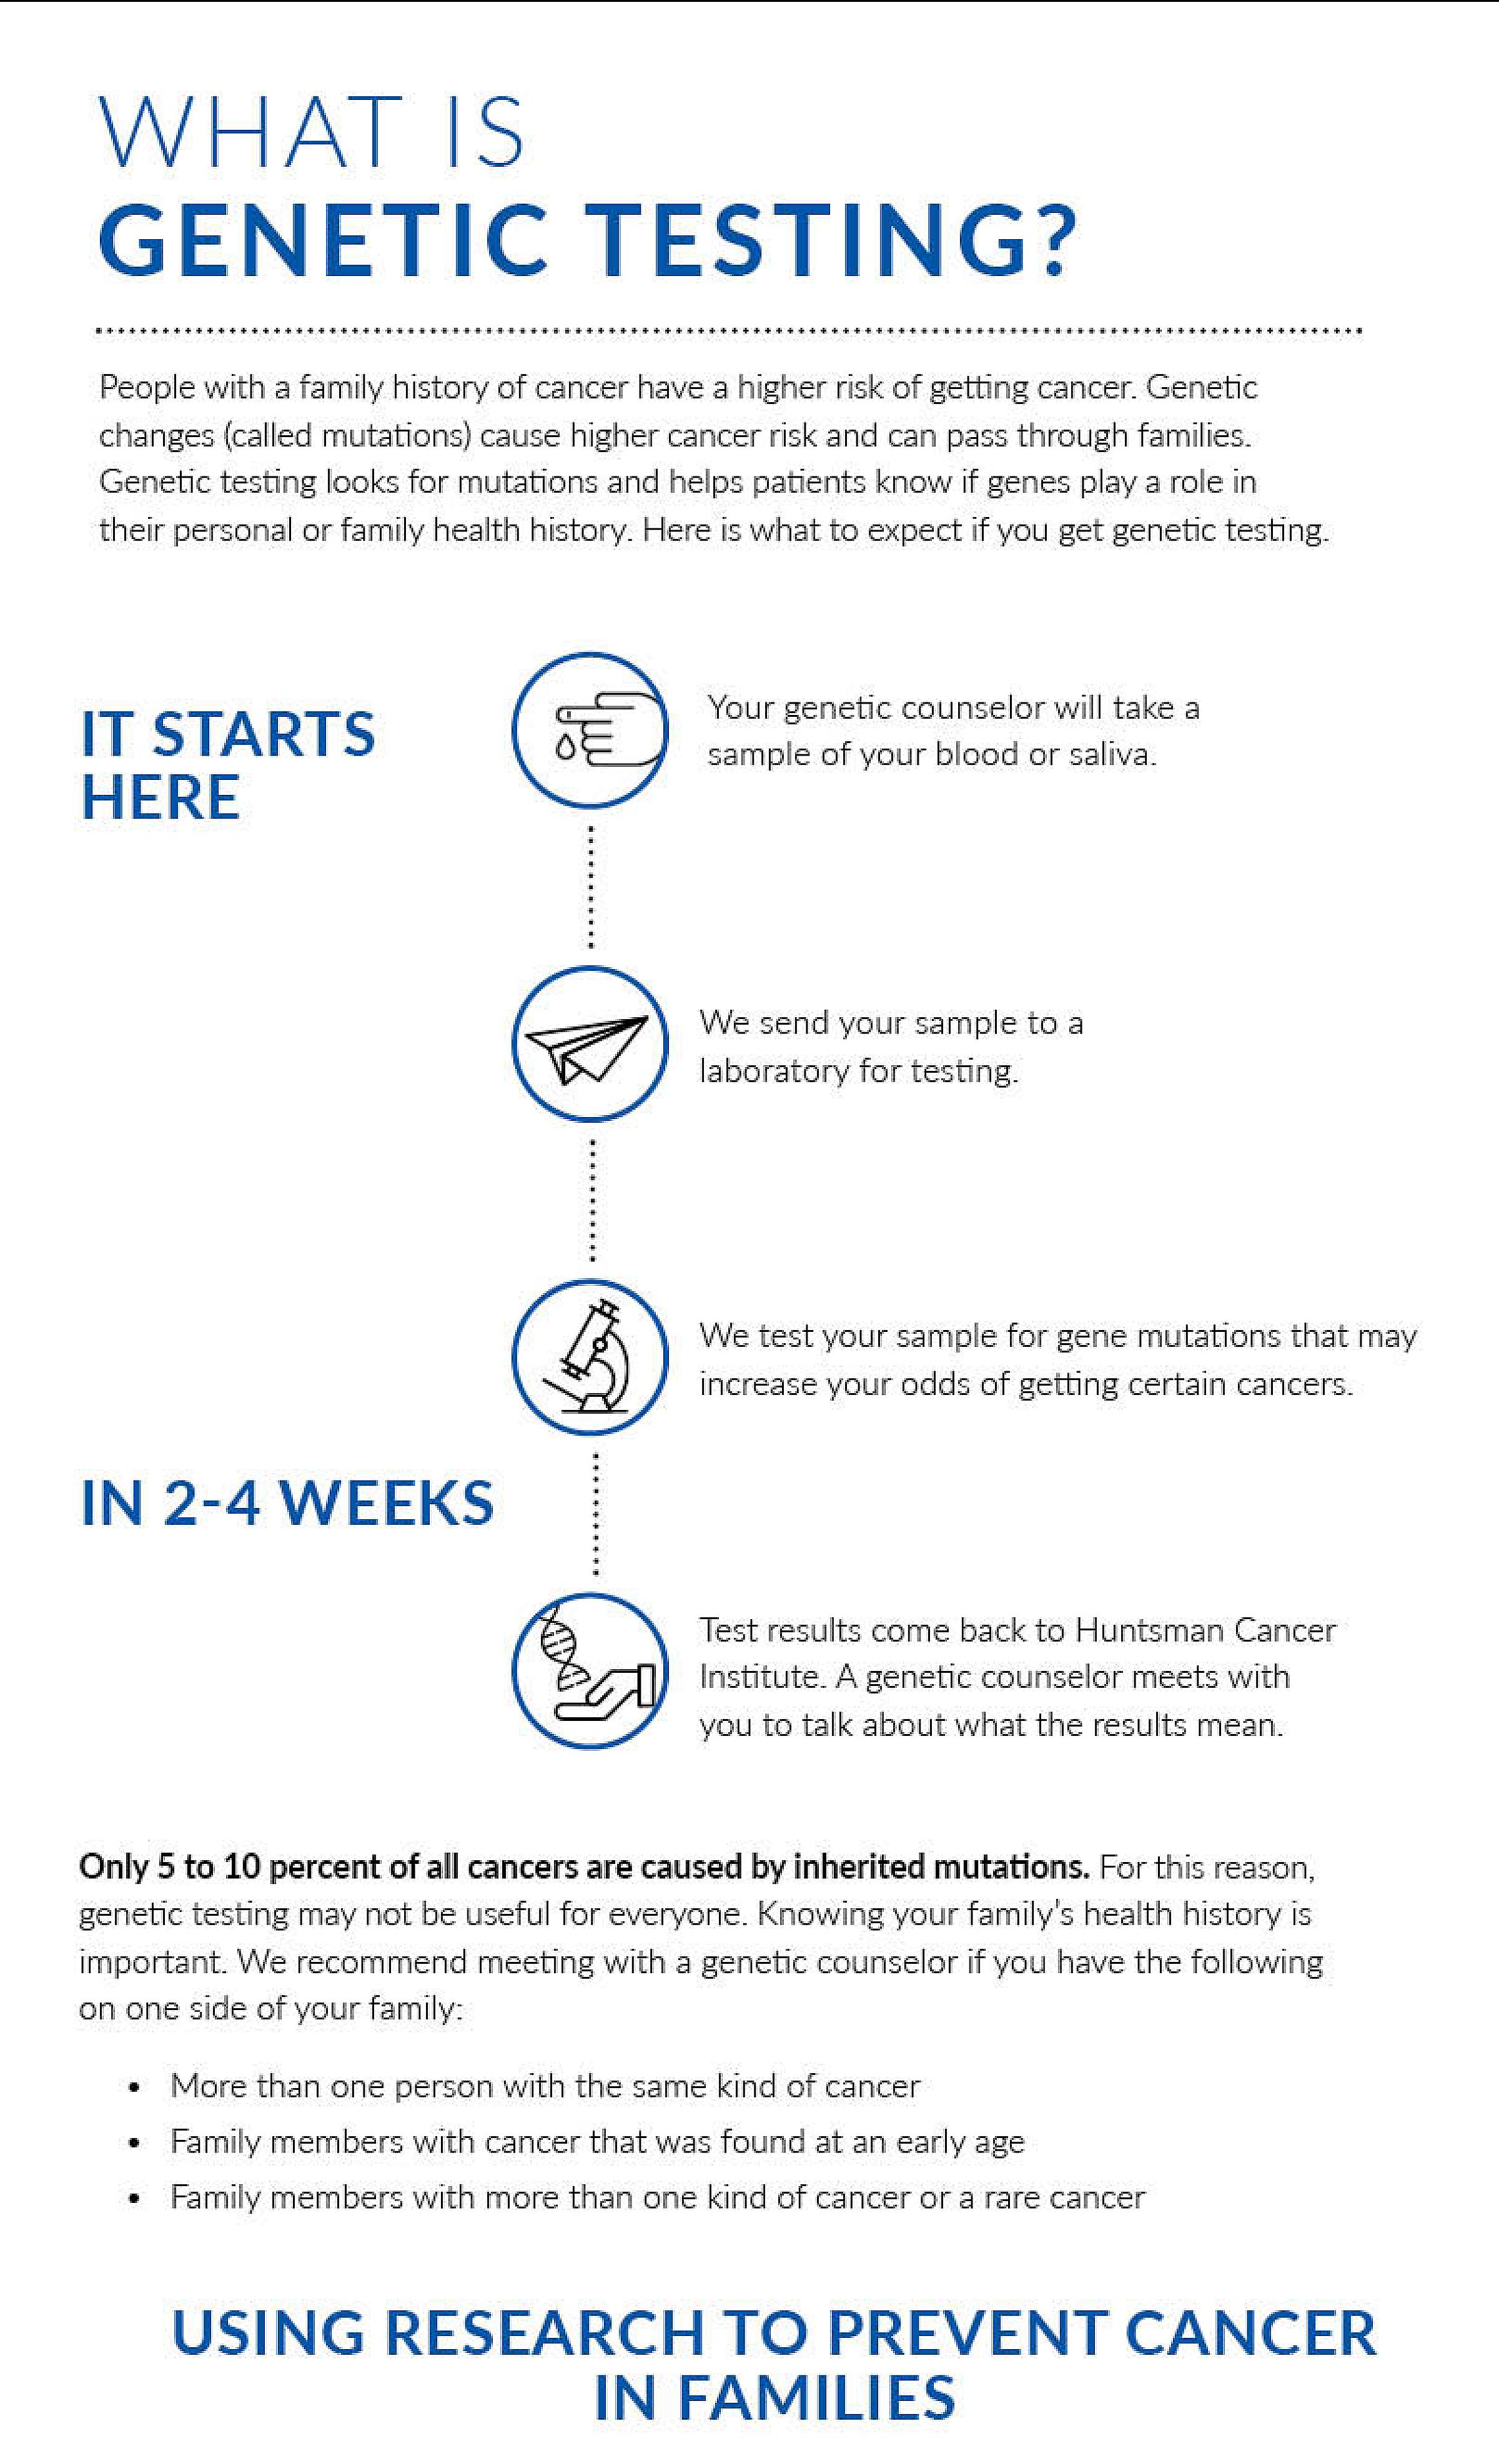 Infographic titled What is Genetic Testing? Steps include genetic counselor taking a sample, sample being tested for gene mutations, and test results being returned in 2-4 weeks